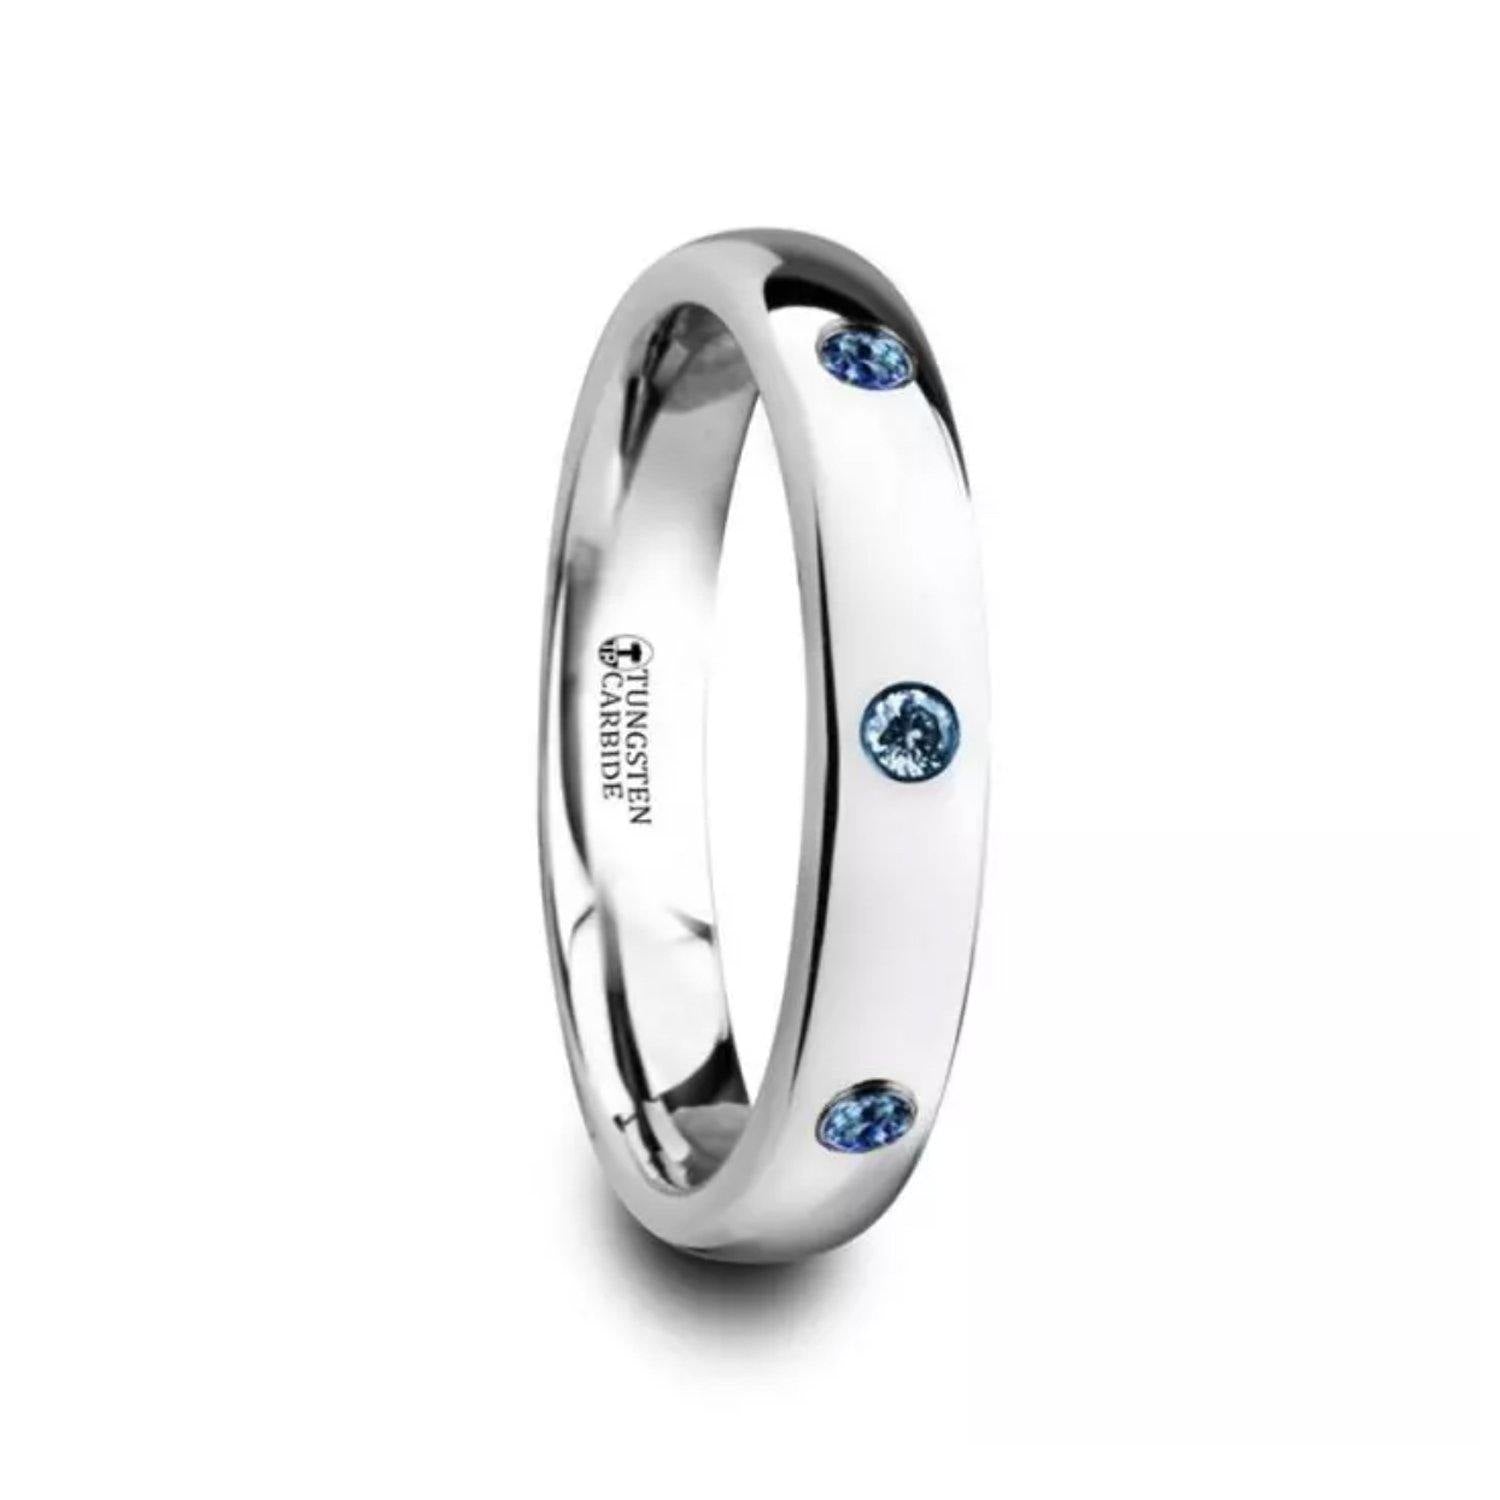 HALIA - Polished and Domed Tungsten Carbide Wedding Ring with 3 Blue Sapphires Setting - 4mm - The Rutile Ltd